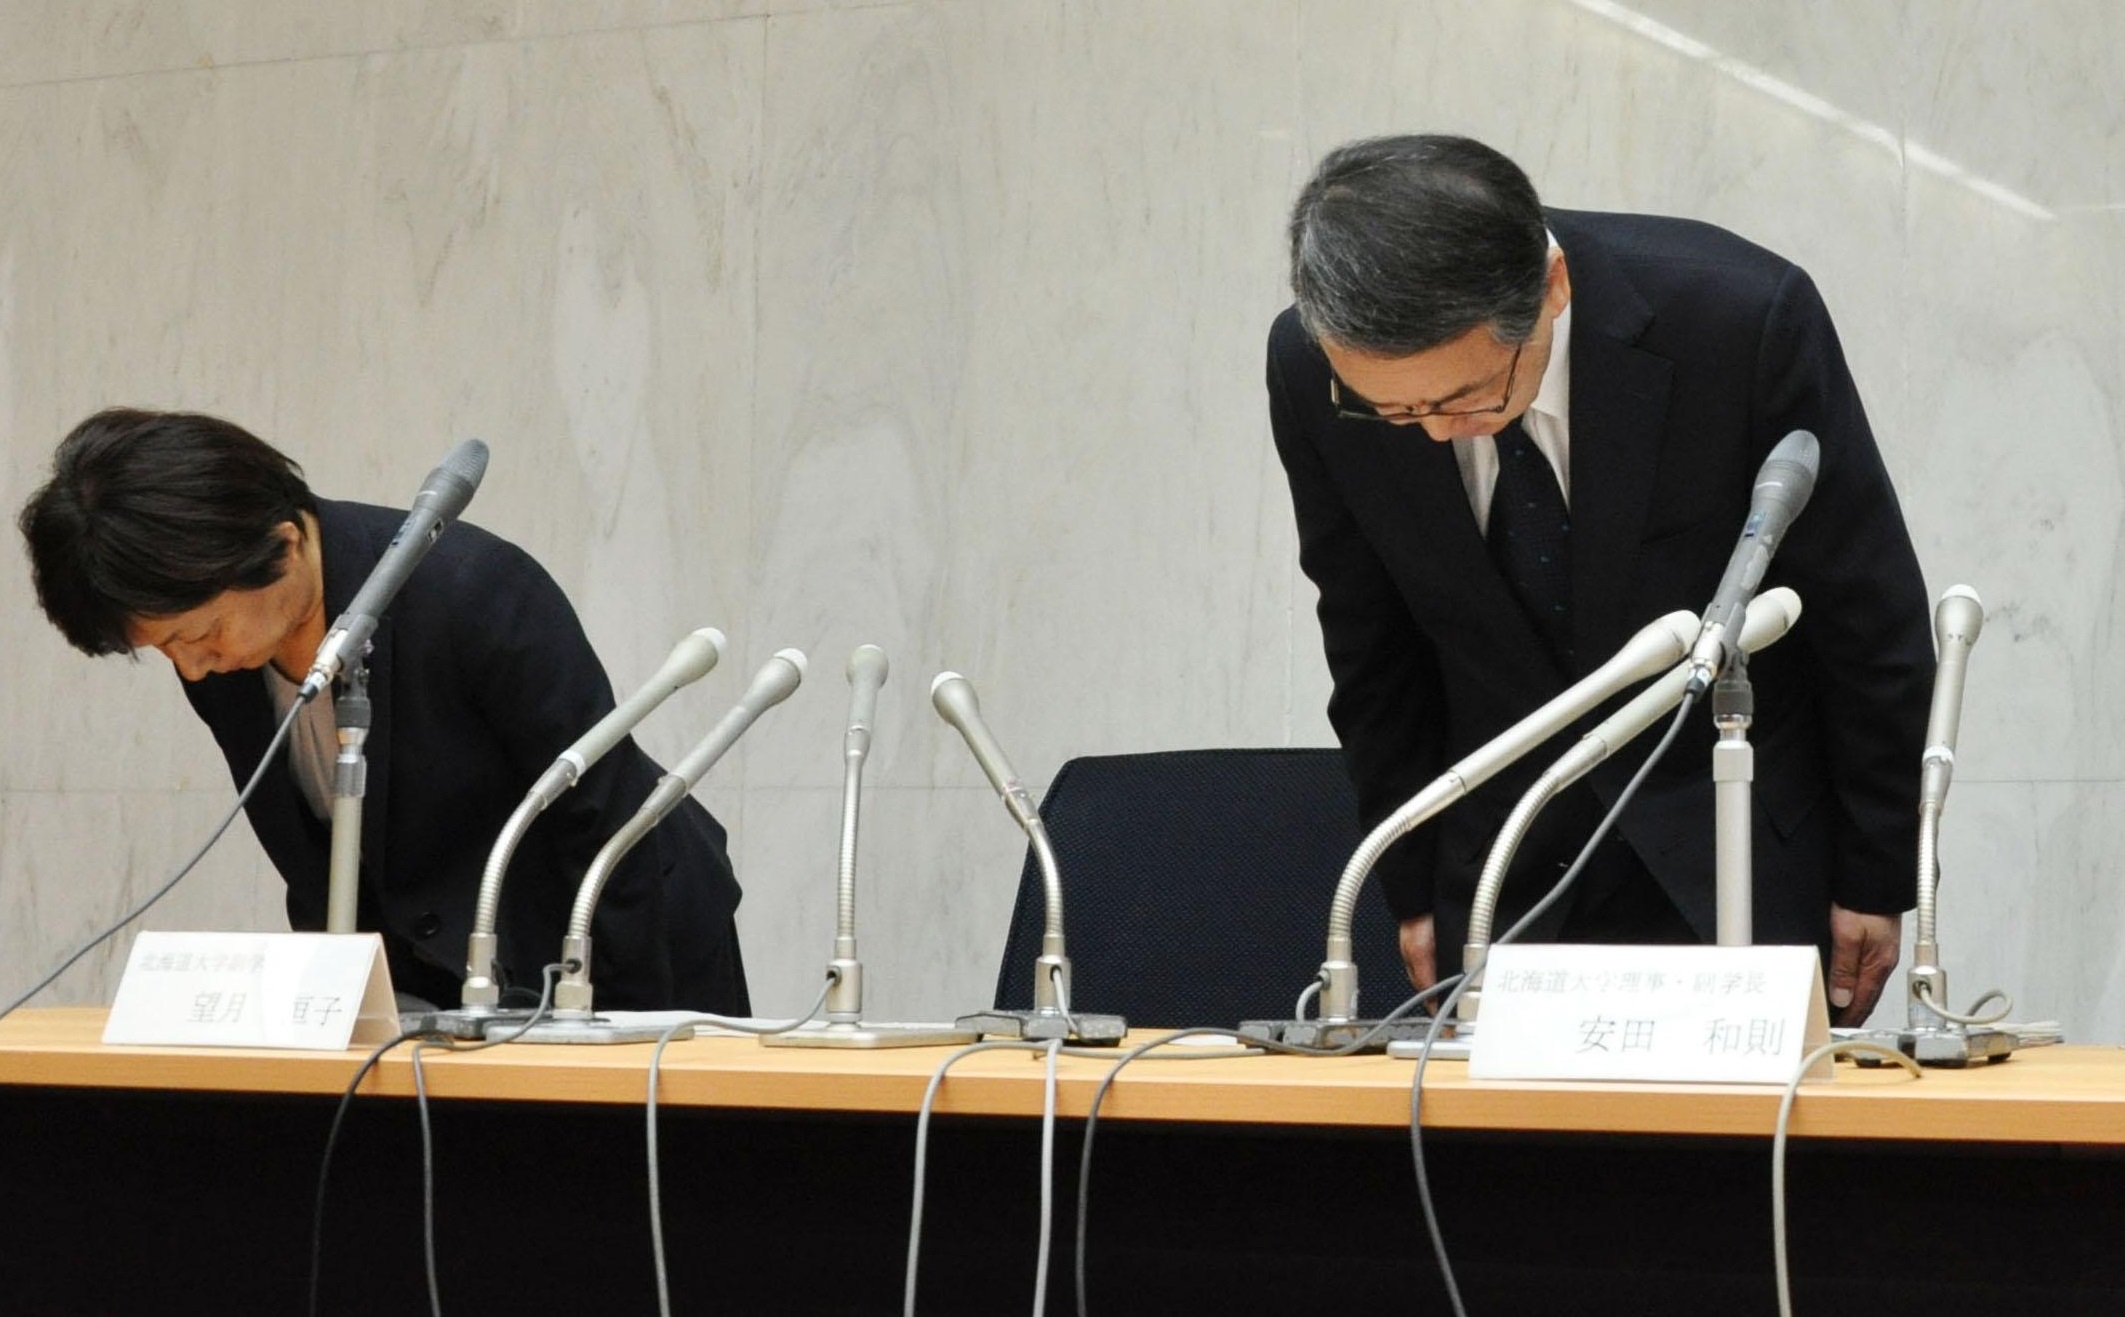 Hokkaido University officials, including Vice President Kazunori Yasuda, bow in apology at its campus in Sapporo on Wednesday over a suspected massive leak of students' personal information. | KYODO